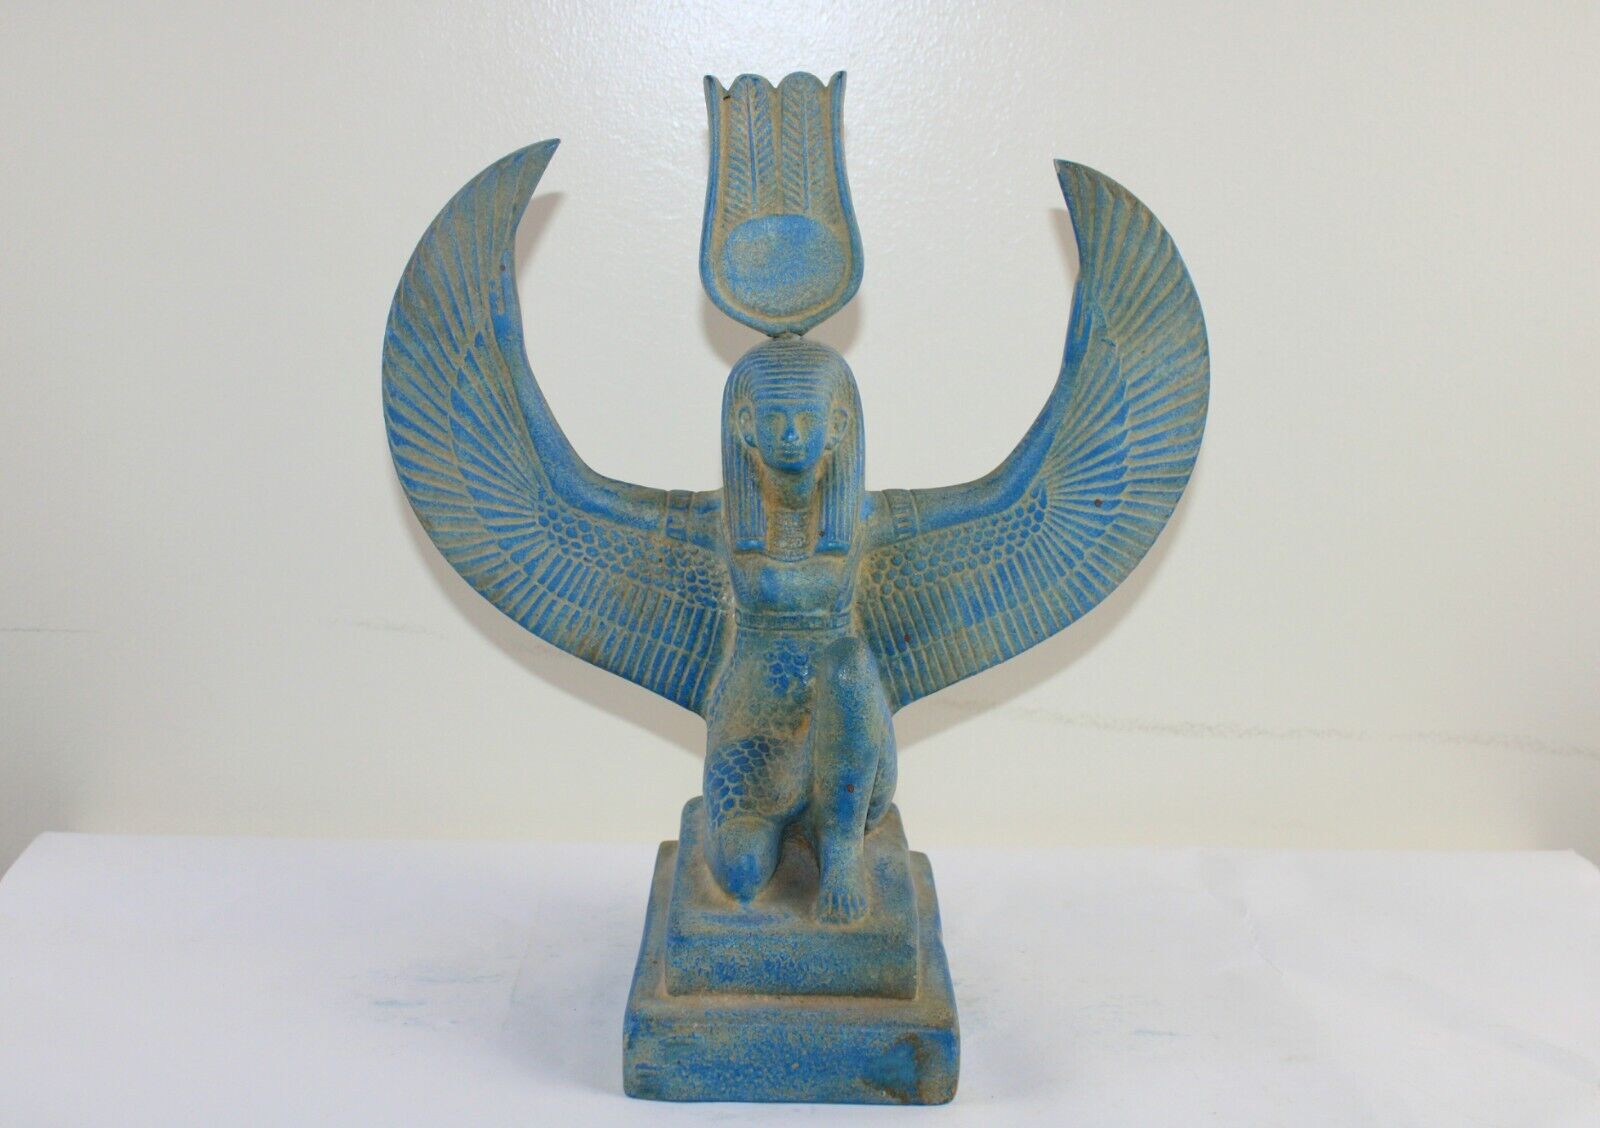 Rare Antique Stone Statue Maat Winged Ancient Egyptian Goddess of Truth, Justice